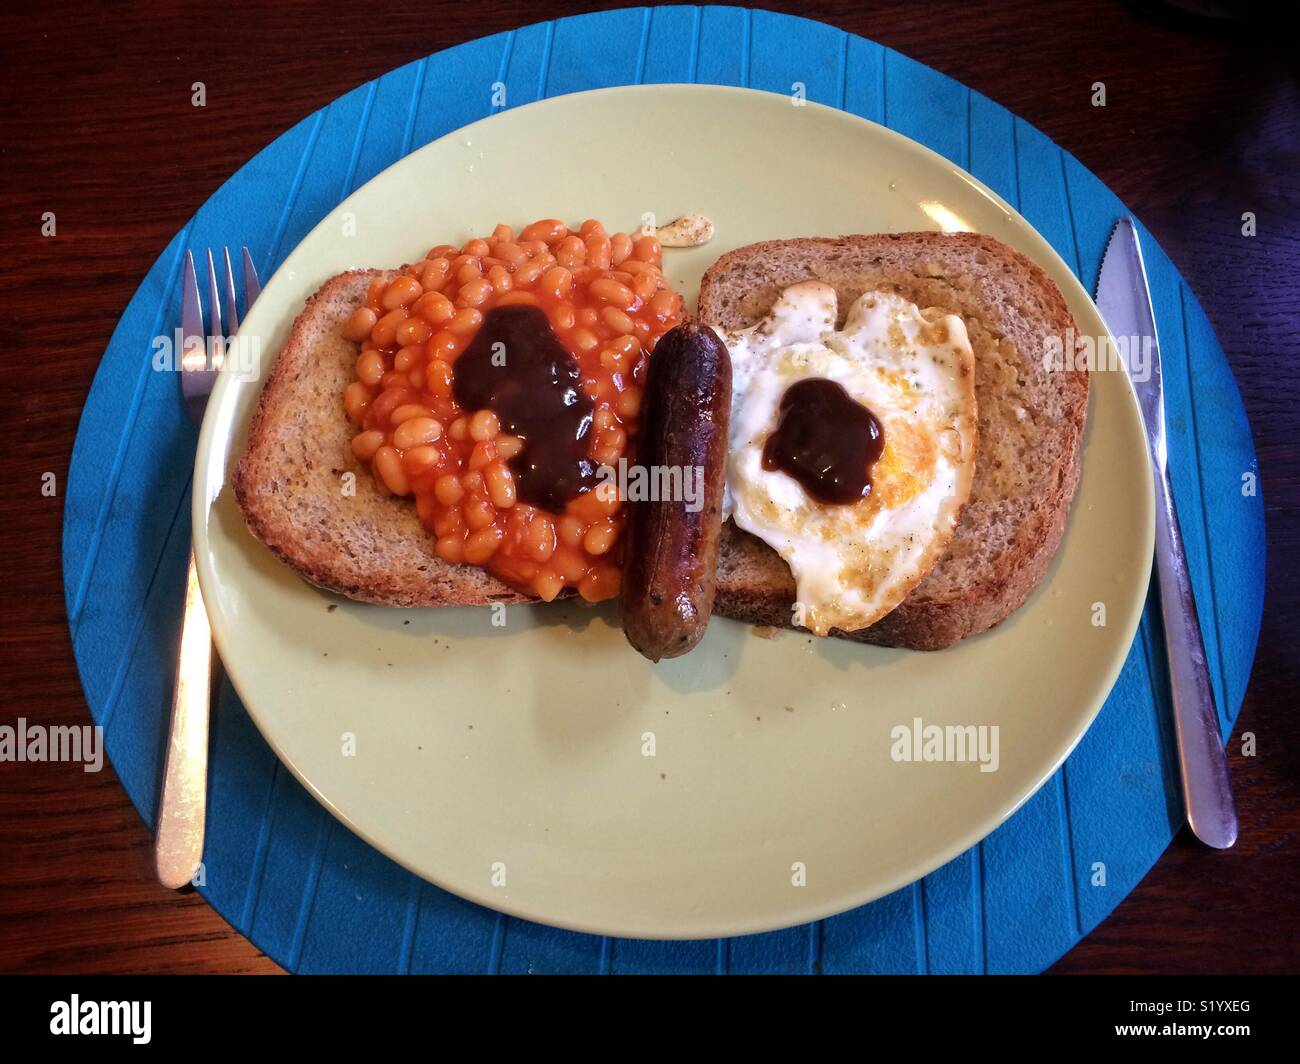 A veggie breakfast with toast, fried egg, beans and a vegetarian sausage and brown sauce. It looks like a face! Stock Photo